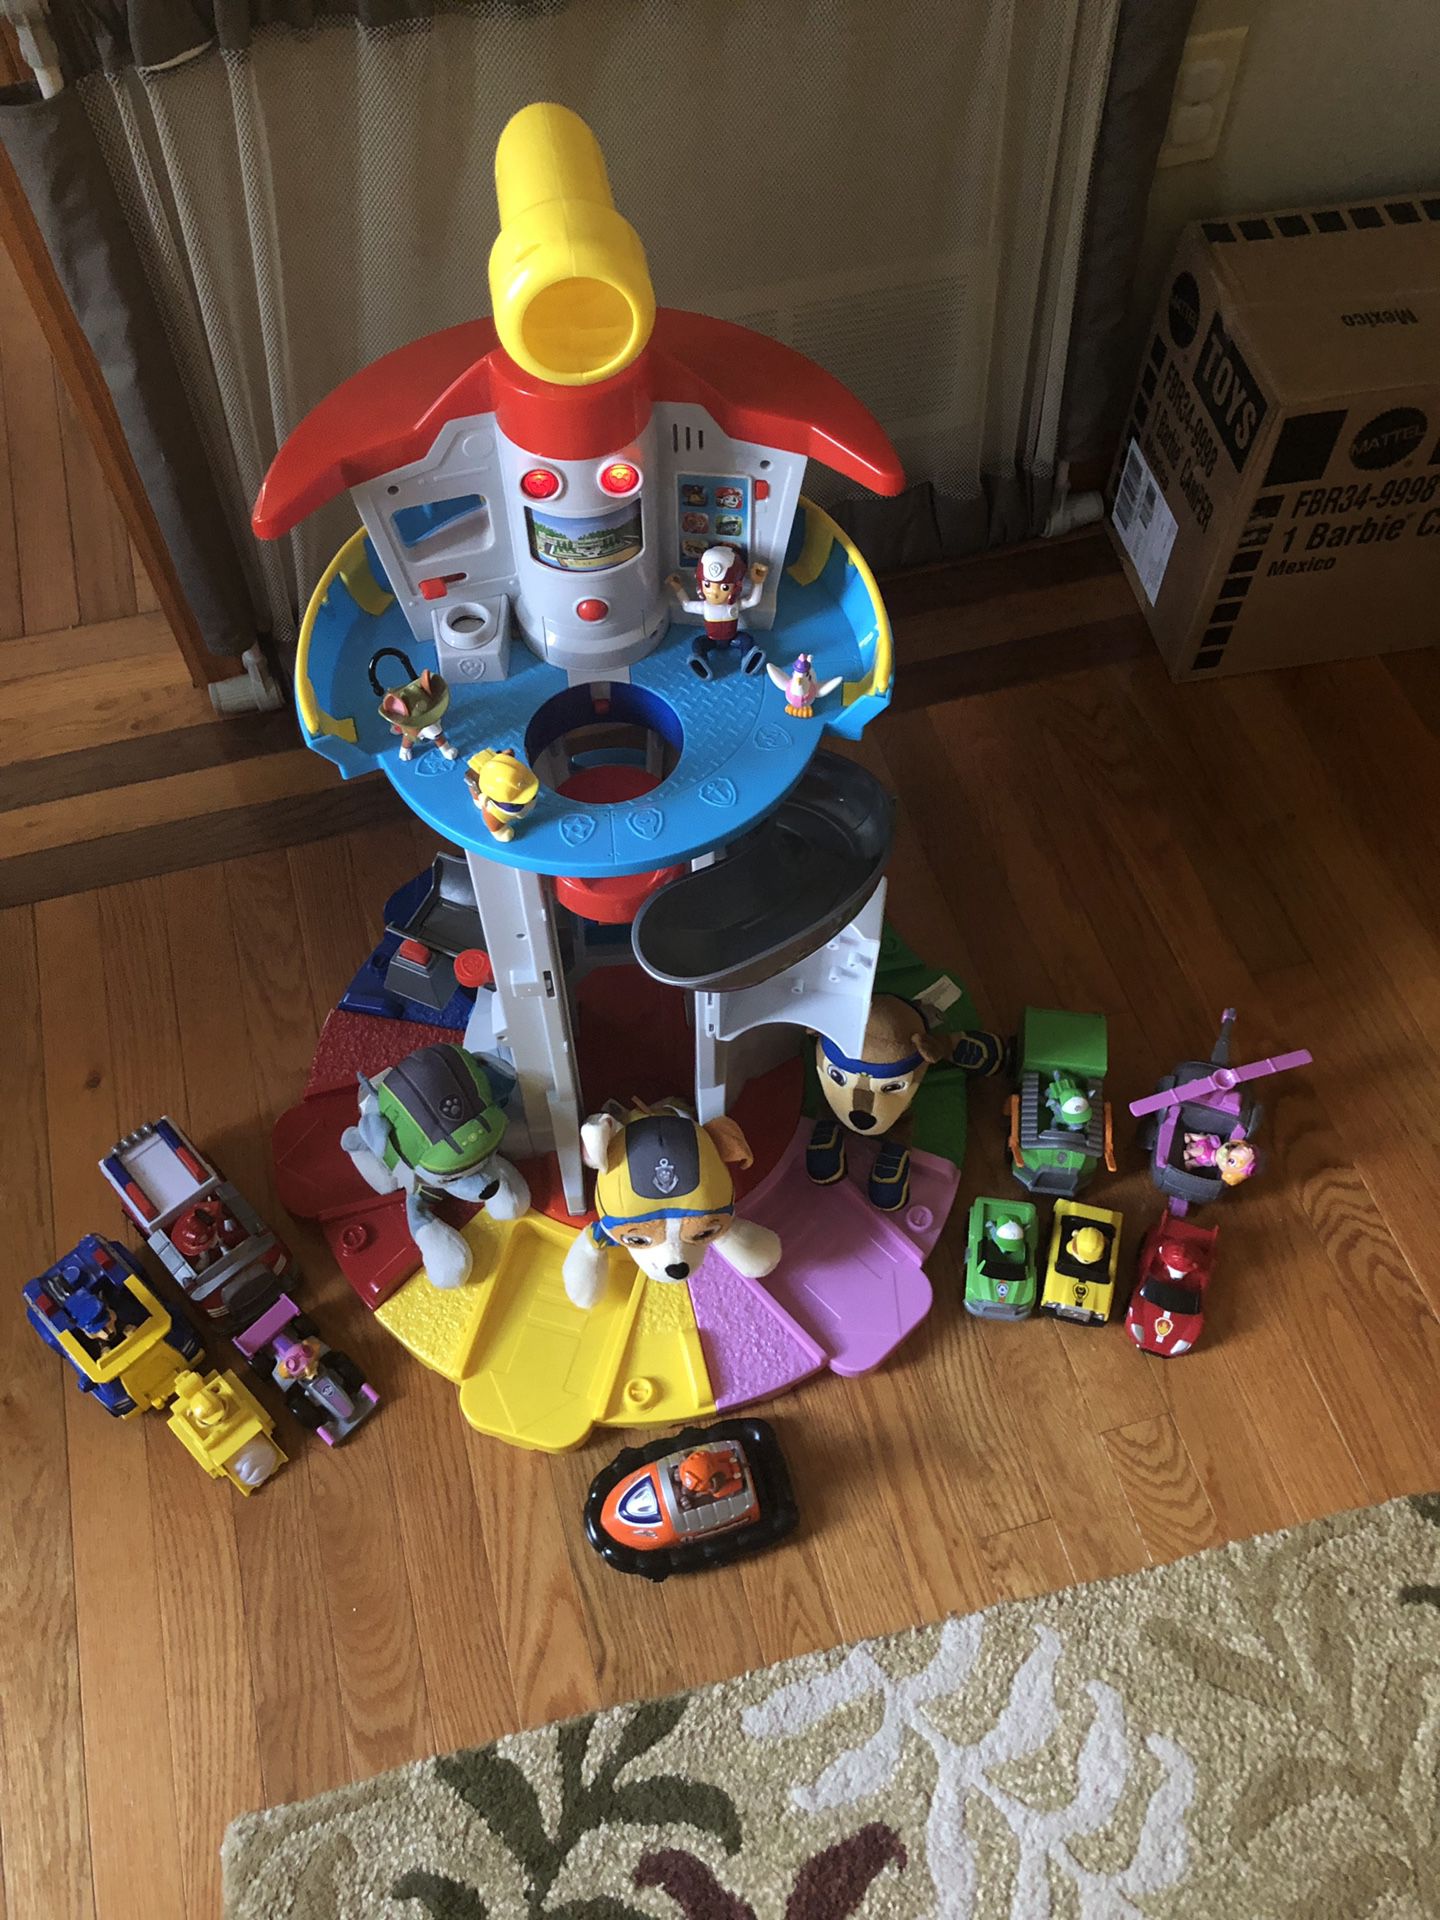 Paw Patrol lookout tower slightly used! Missing jet packs